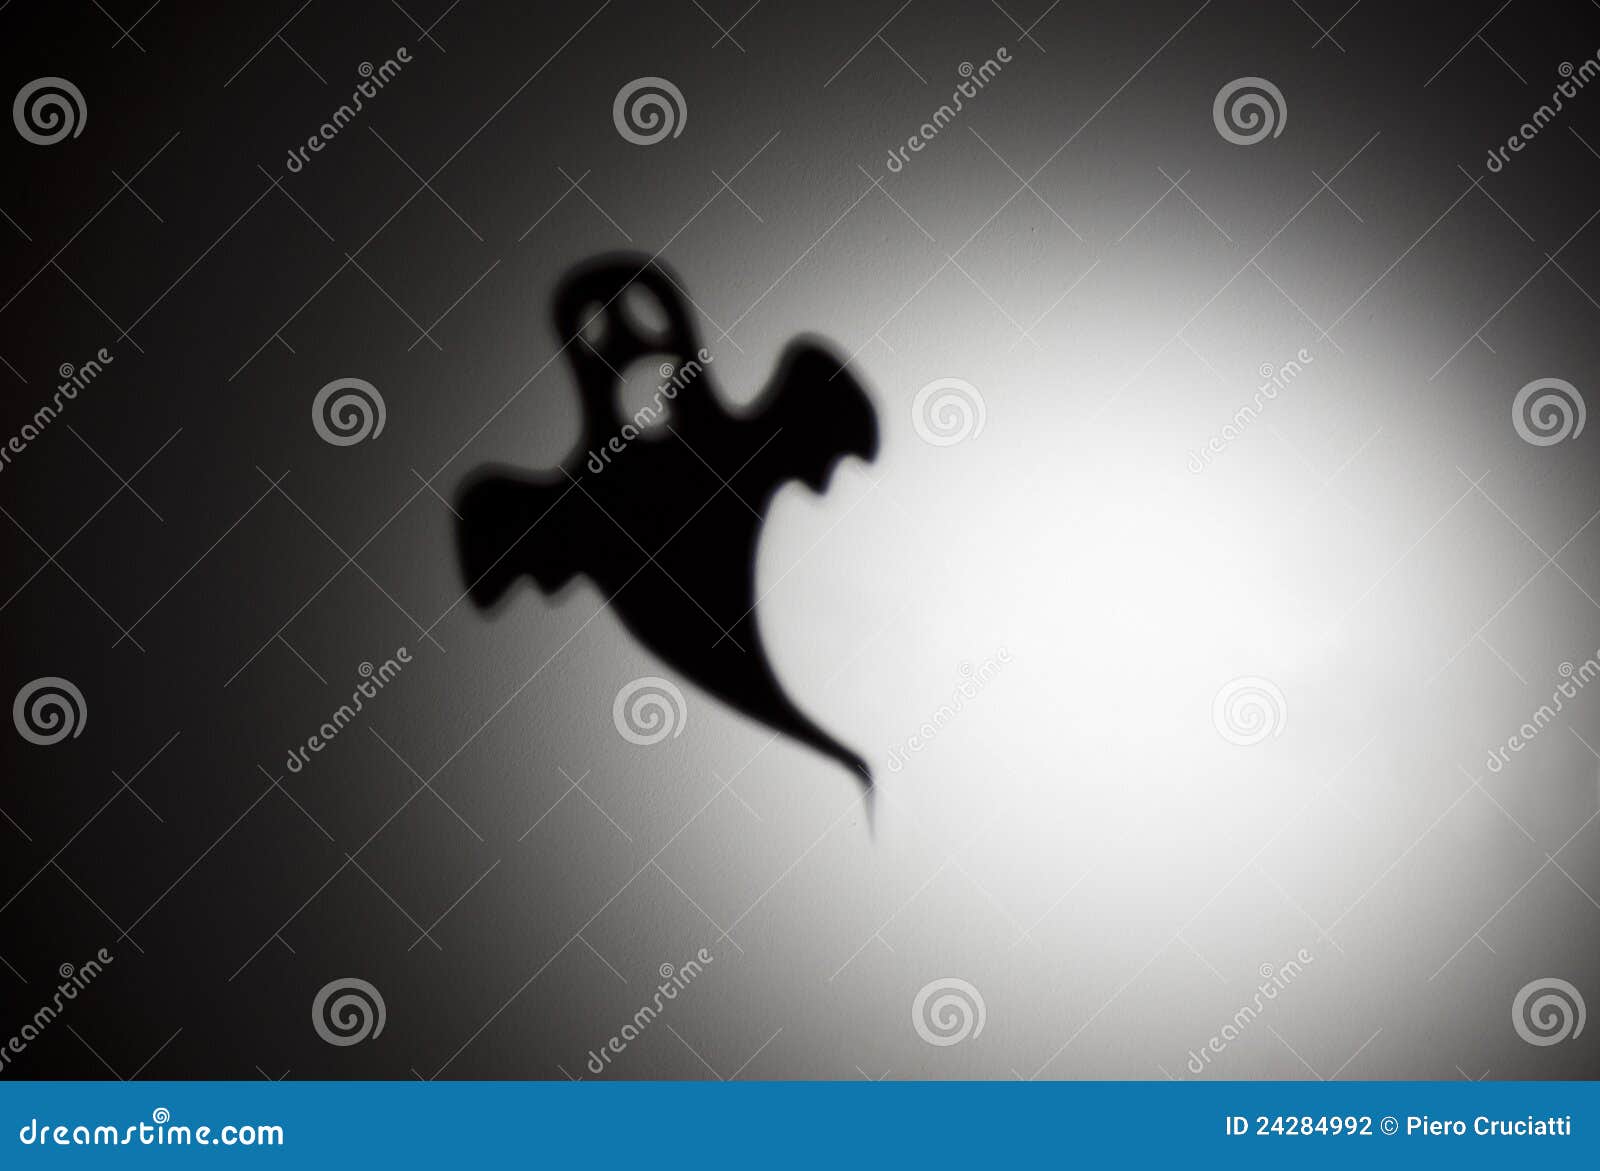 Scary ghost stock photo. Image of background, childhood - 24284992